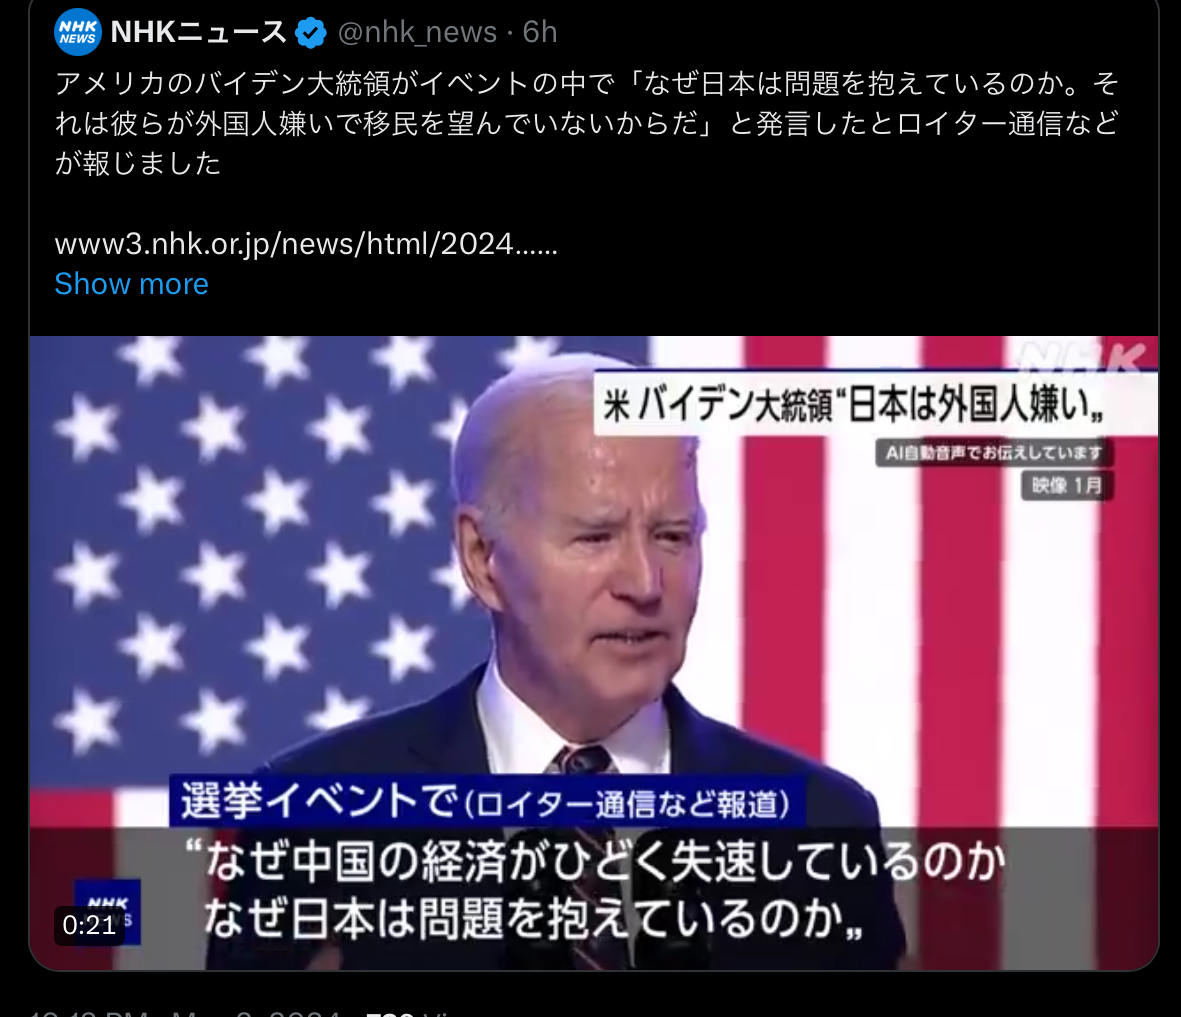 Pop quiz! Joe Biden said many of Japan’s problems stem from it being xenophobic and unwelcome to immigration. What do you think? Meanwhile #外国人嫌い (I/We Hate Foreigners) is trending on twitter in Japan. Quiz below